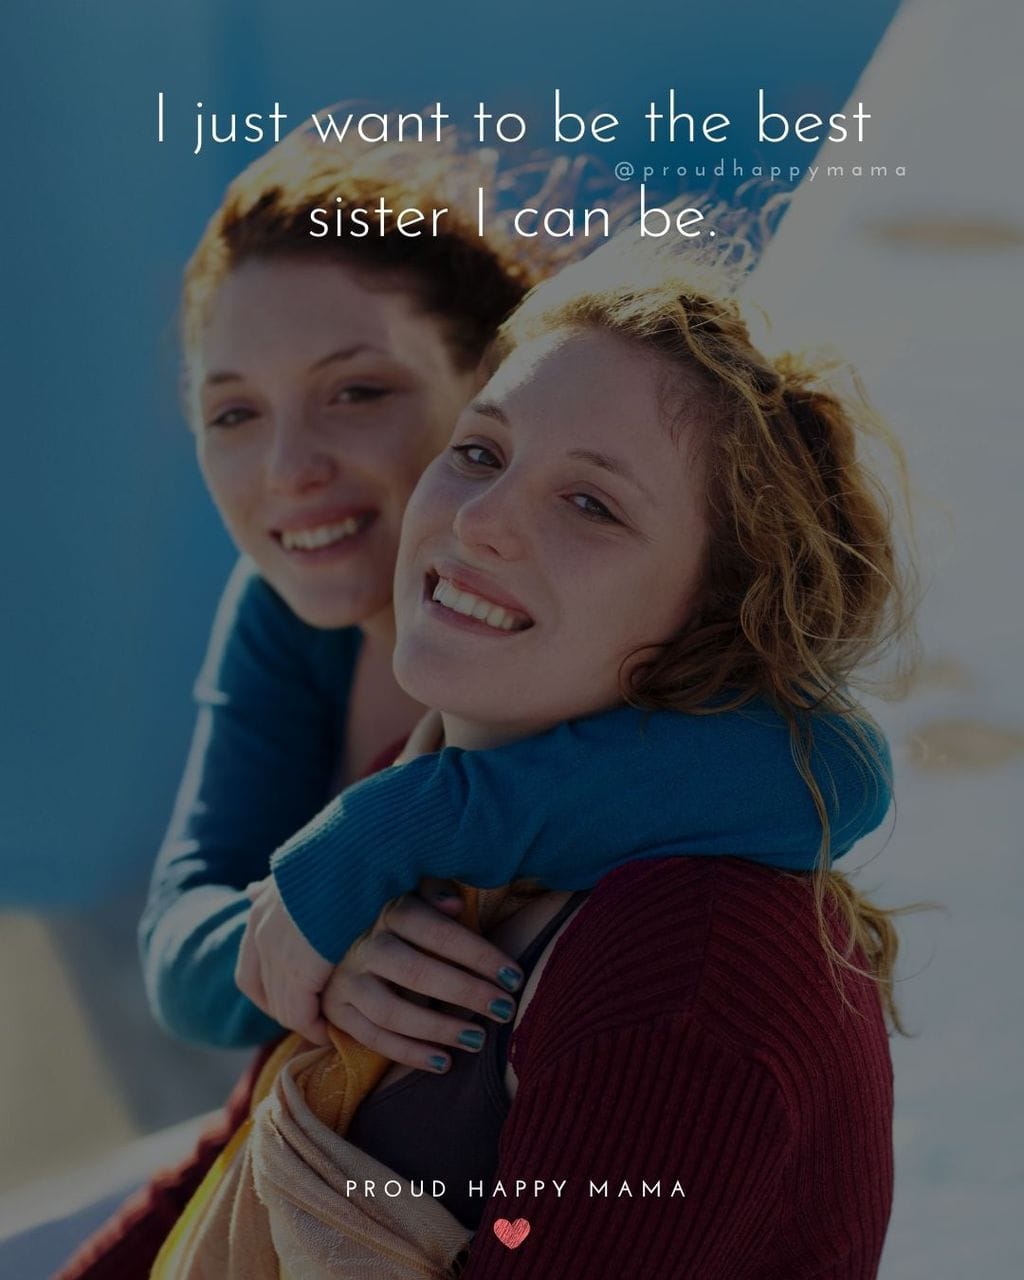 Sister Quotes - I just want to be the best sister I can be.